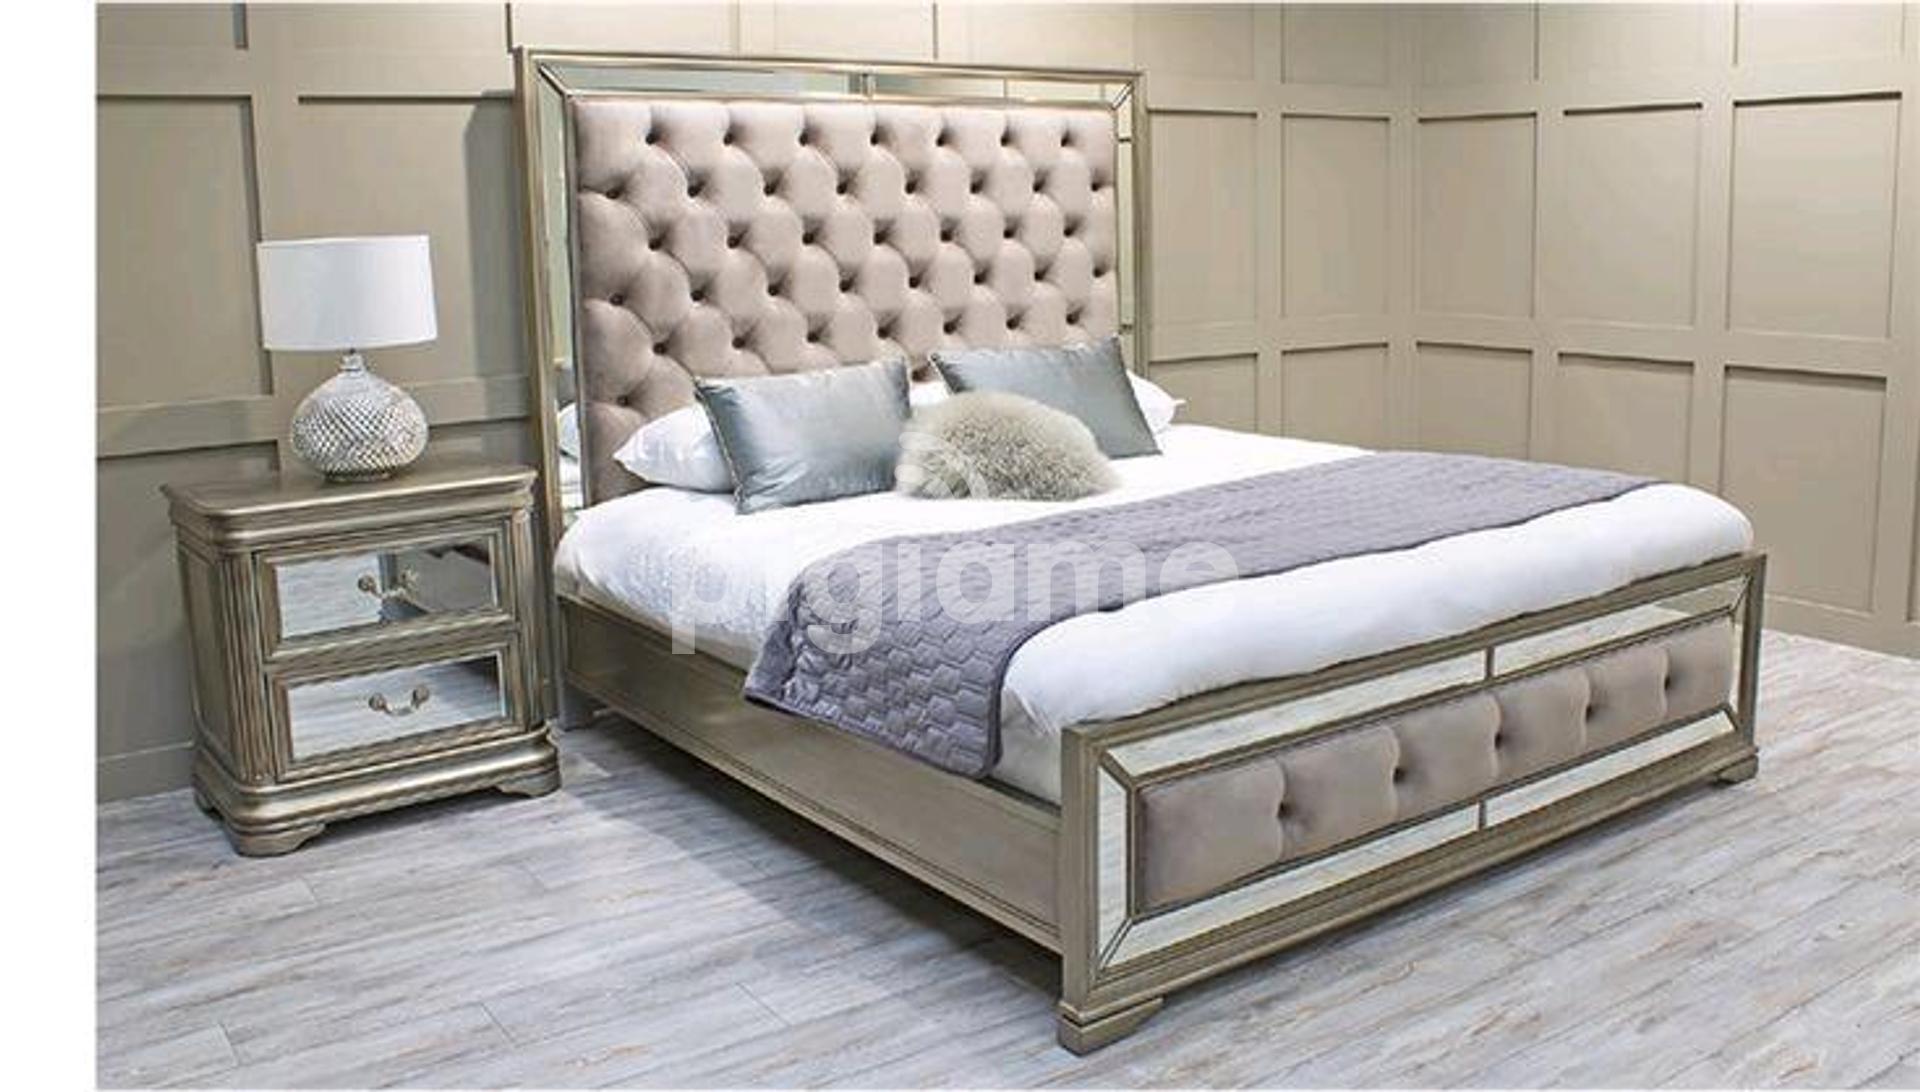 6*6 Mirrored Bed Ideas /Quality Bed Designs For Sale In Nairobi Kenya